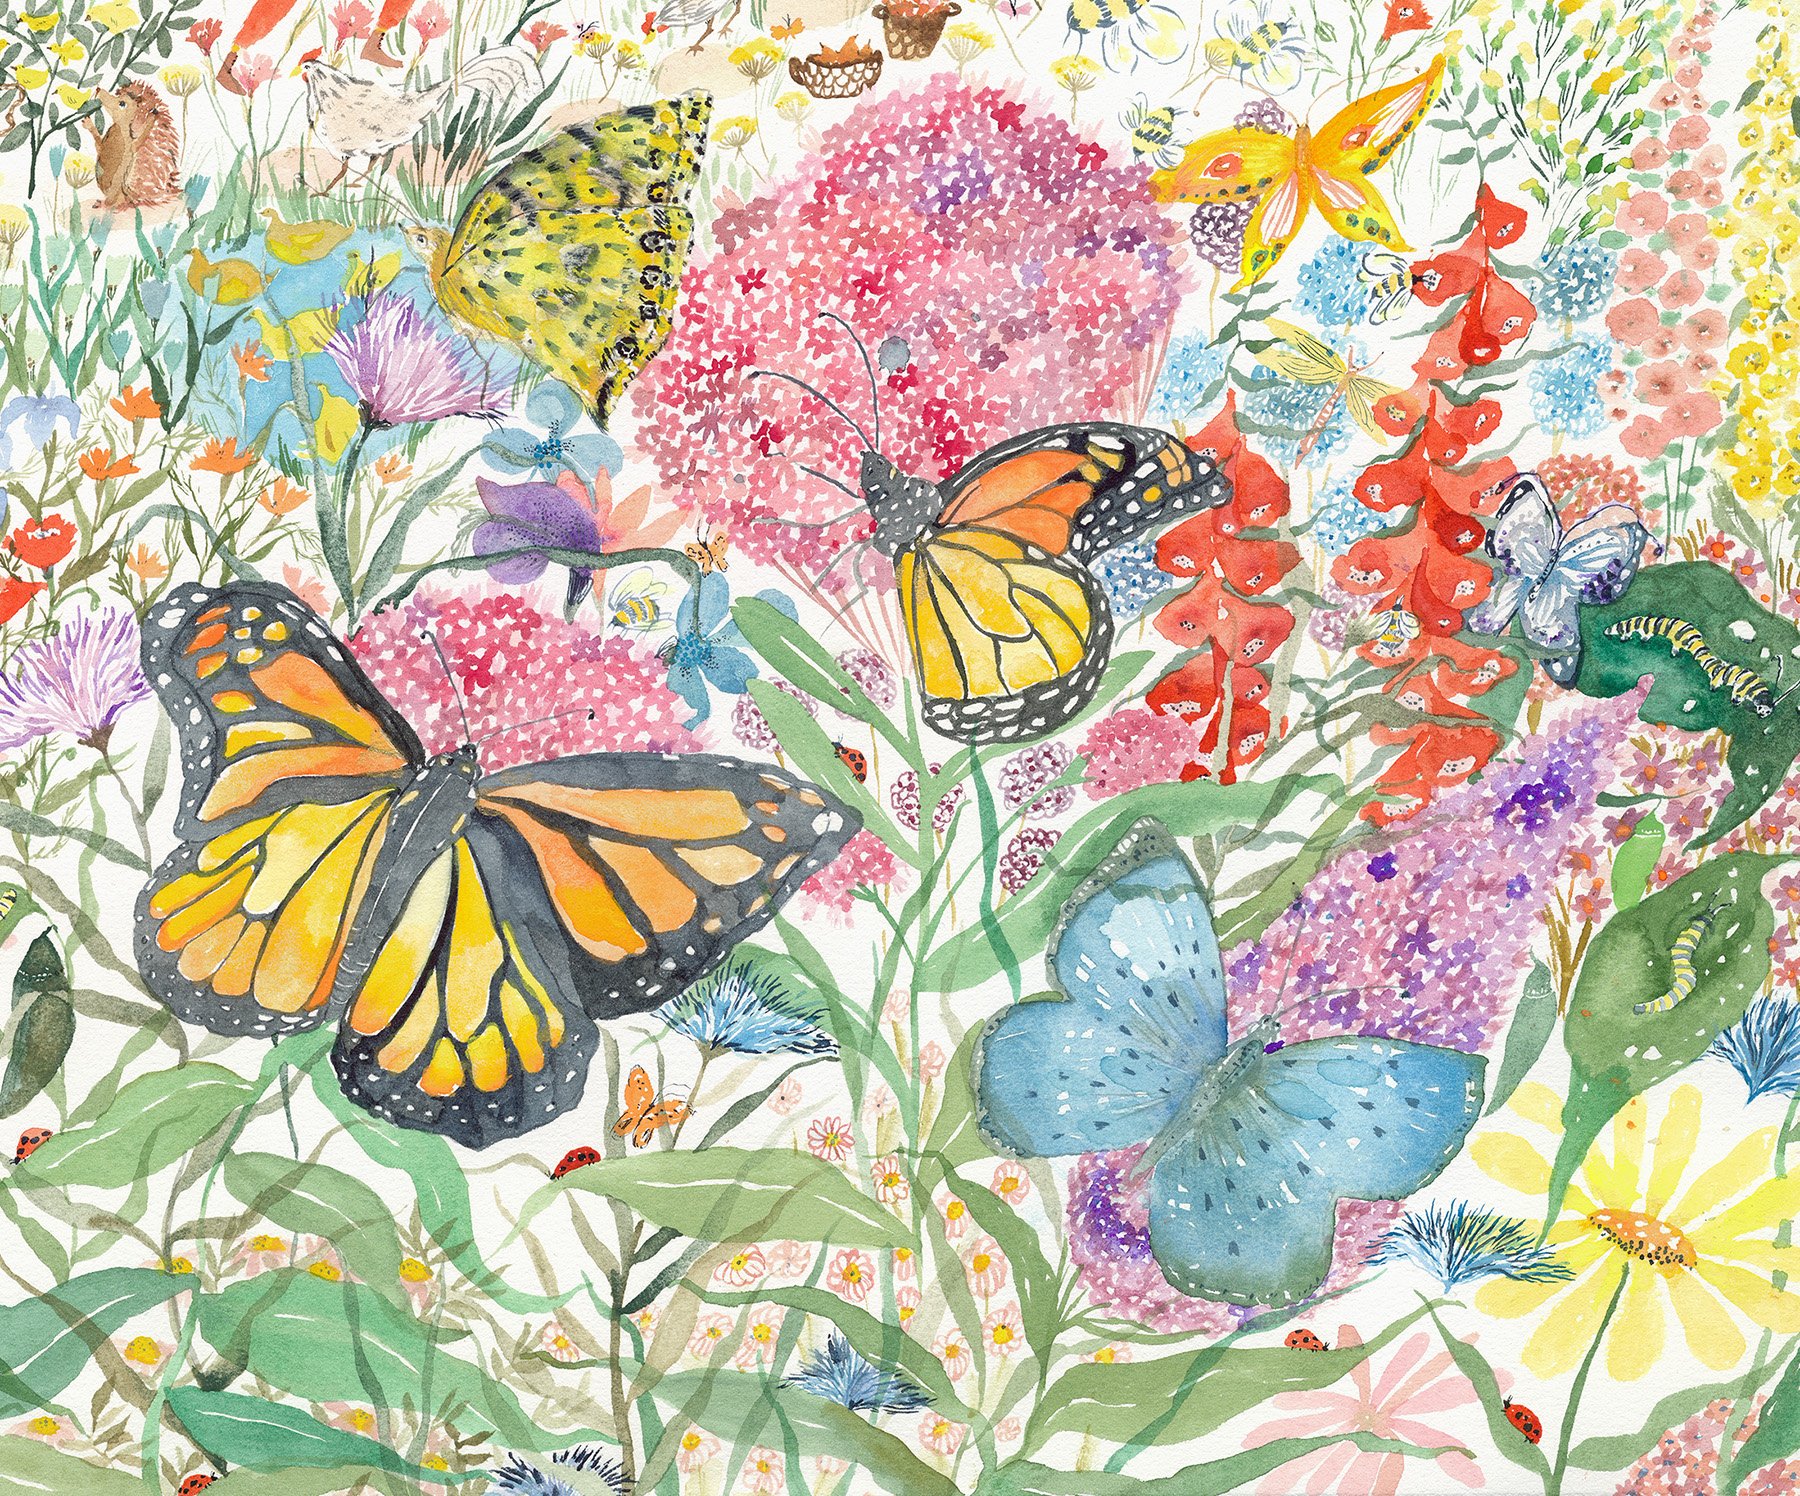   Butterfly Garden, detail   Watercolor on paper, 2023  22” x 30”  $3500  Sold 